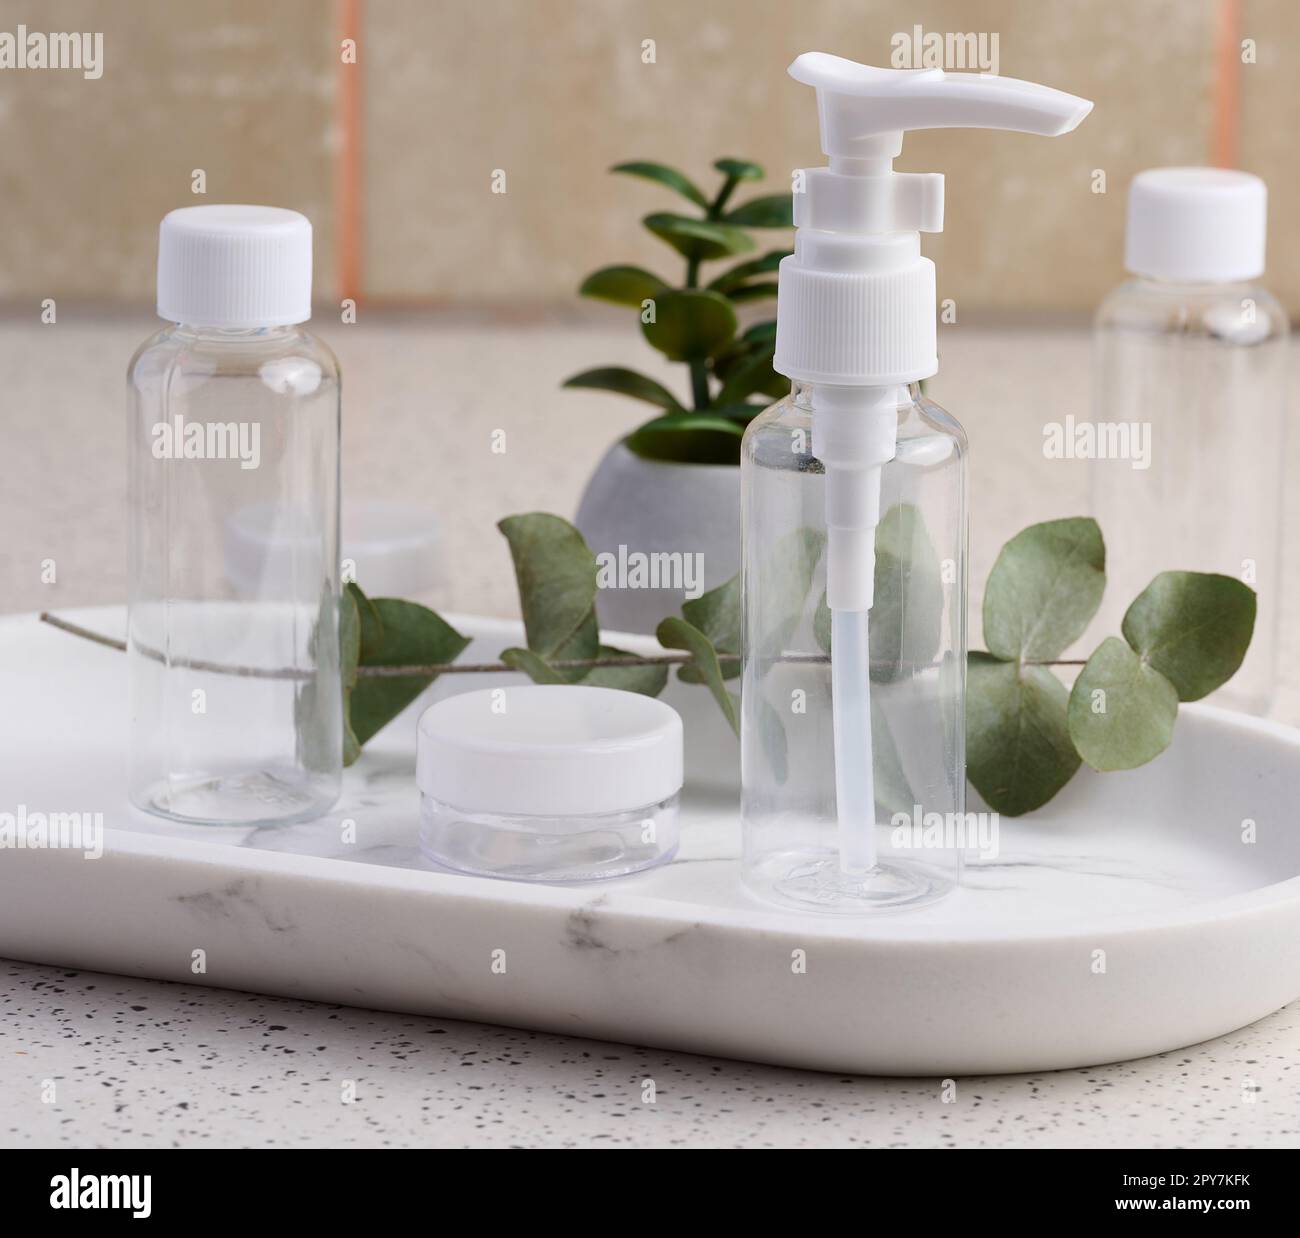 Transparent plastic container for cosmetics on the table, bottles for liquid cosmetics Stock Photo